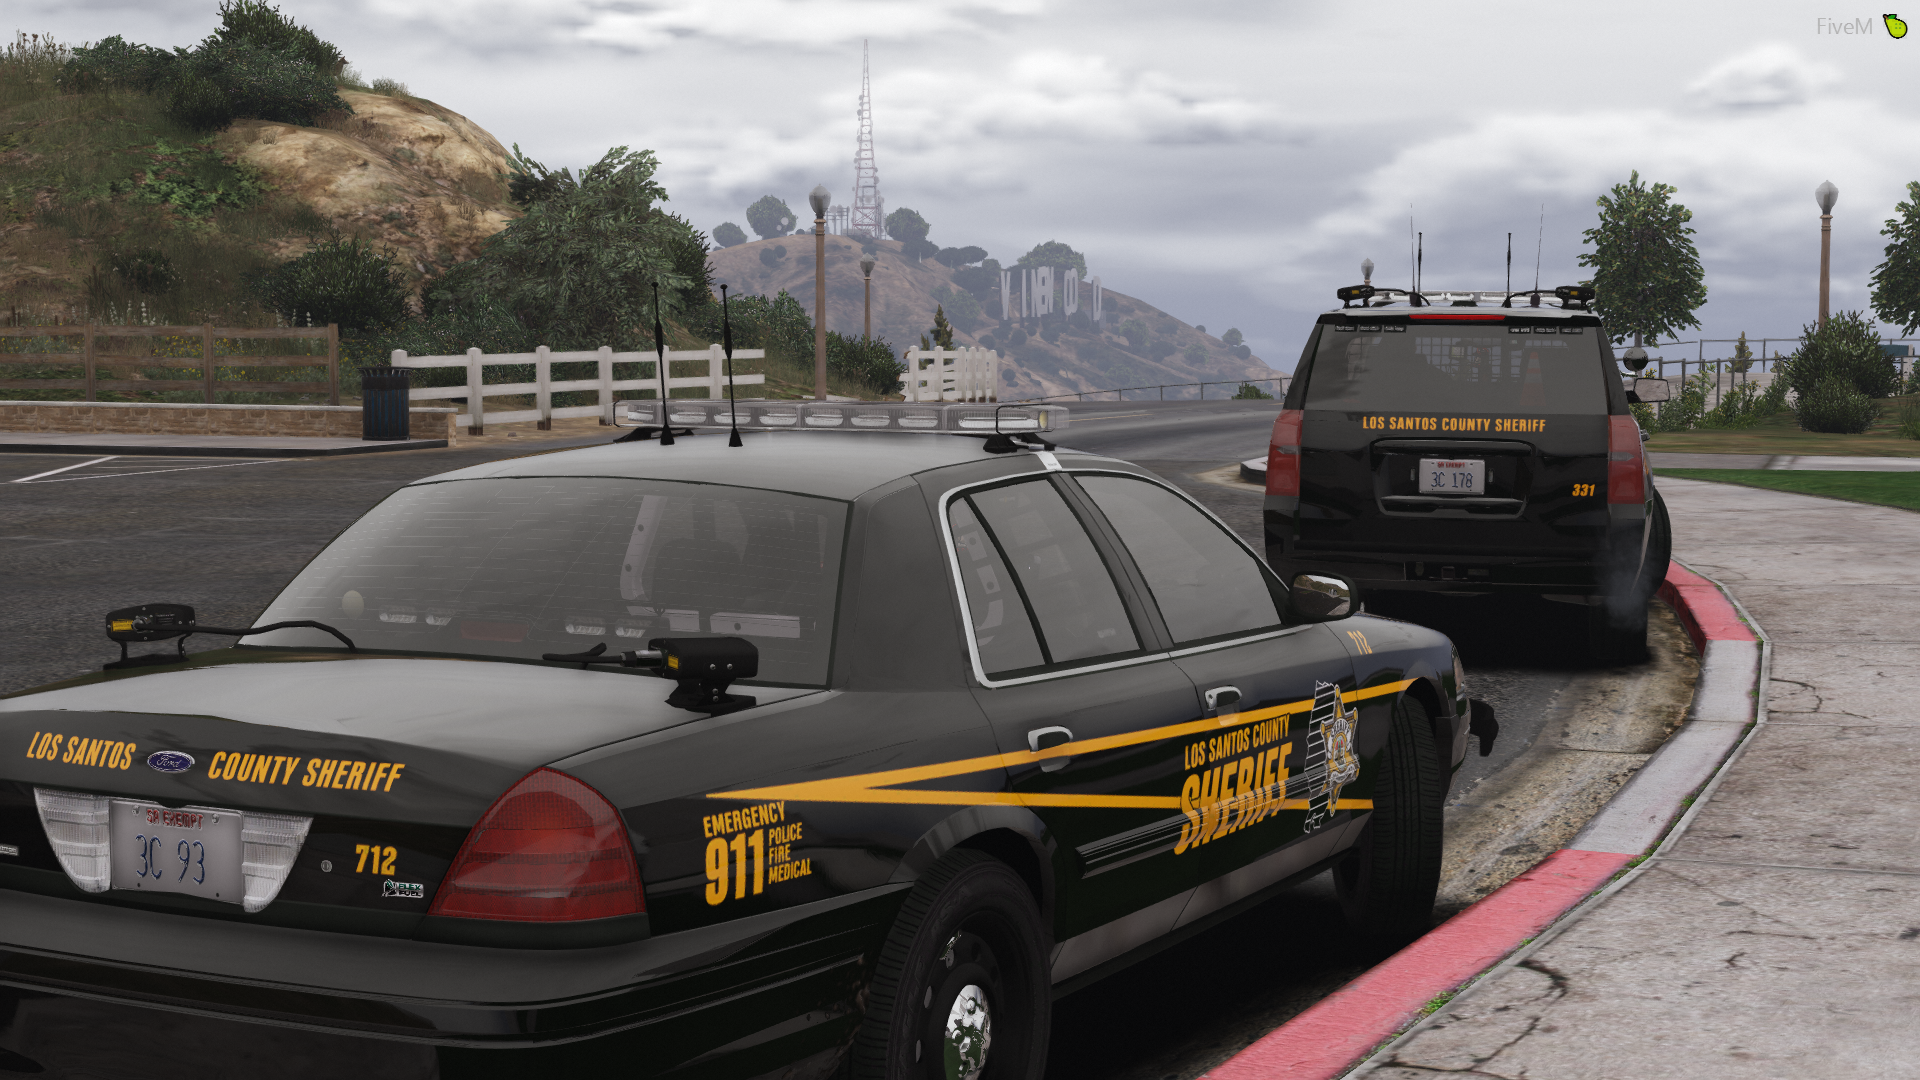 LCSO out on patrol!